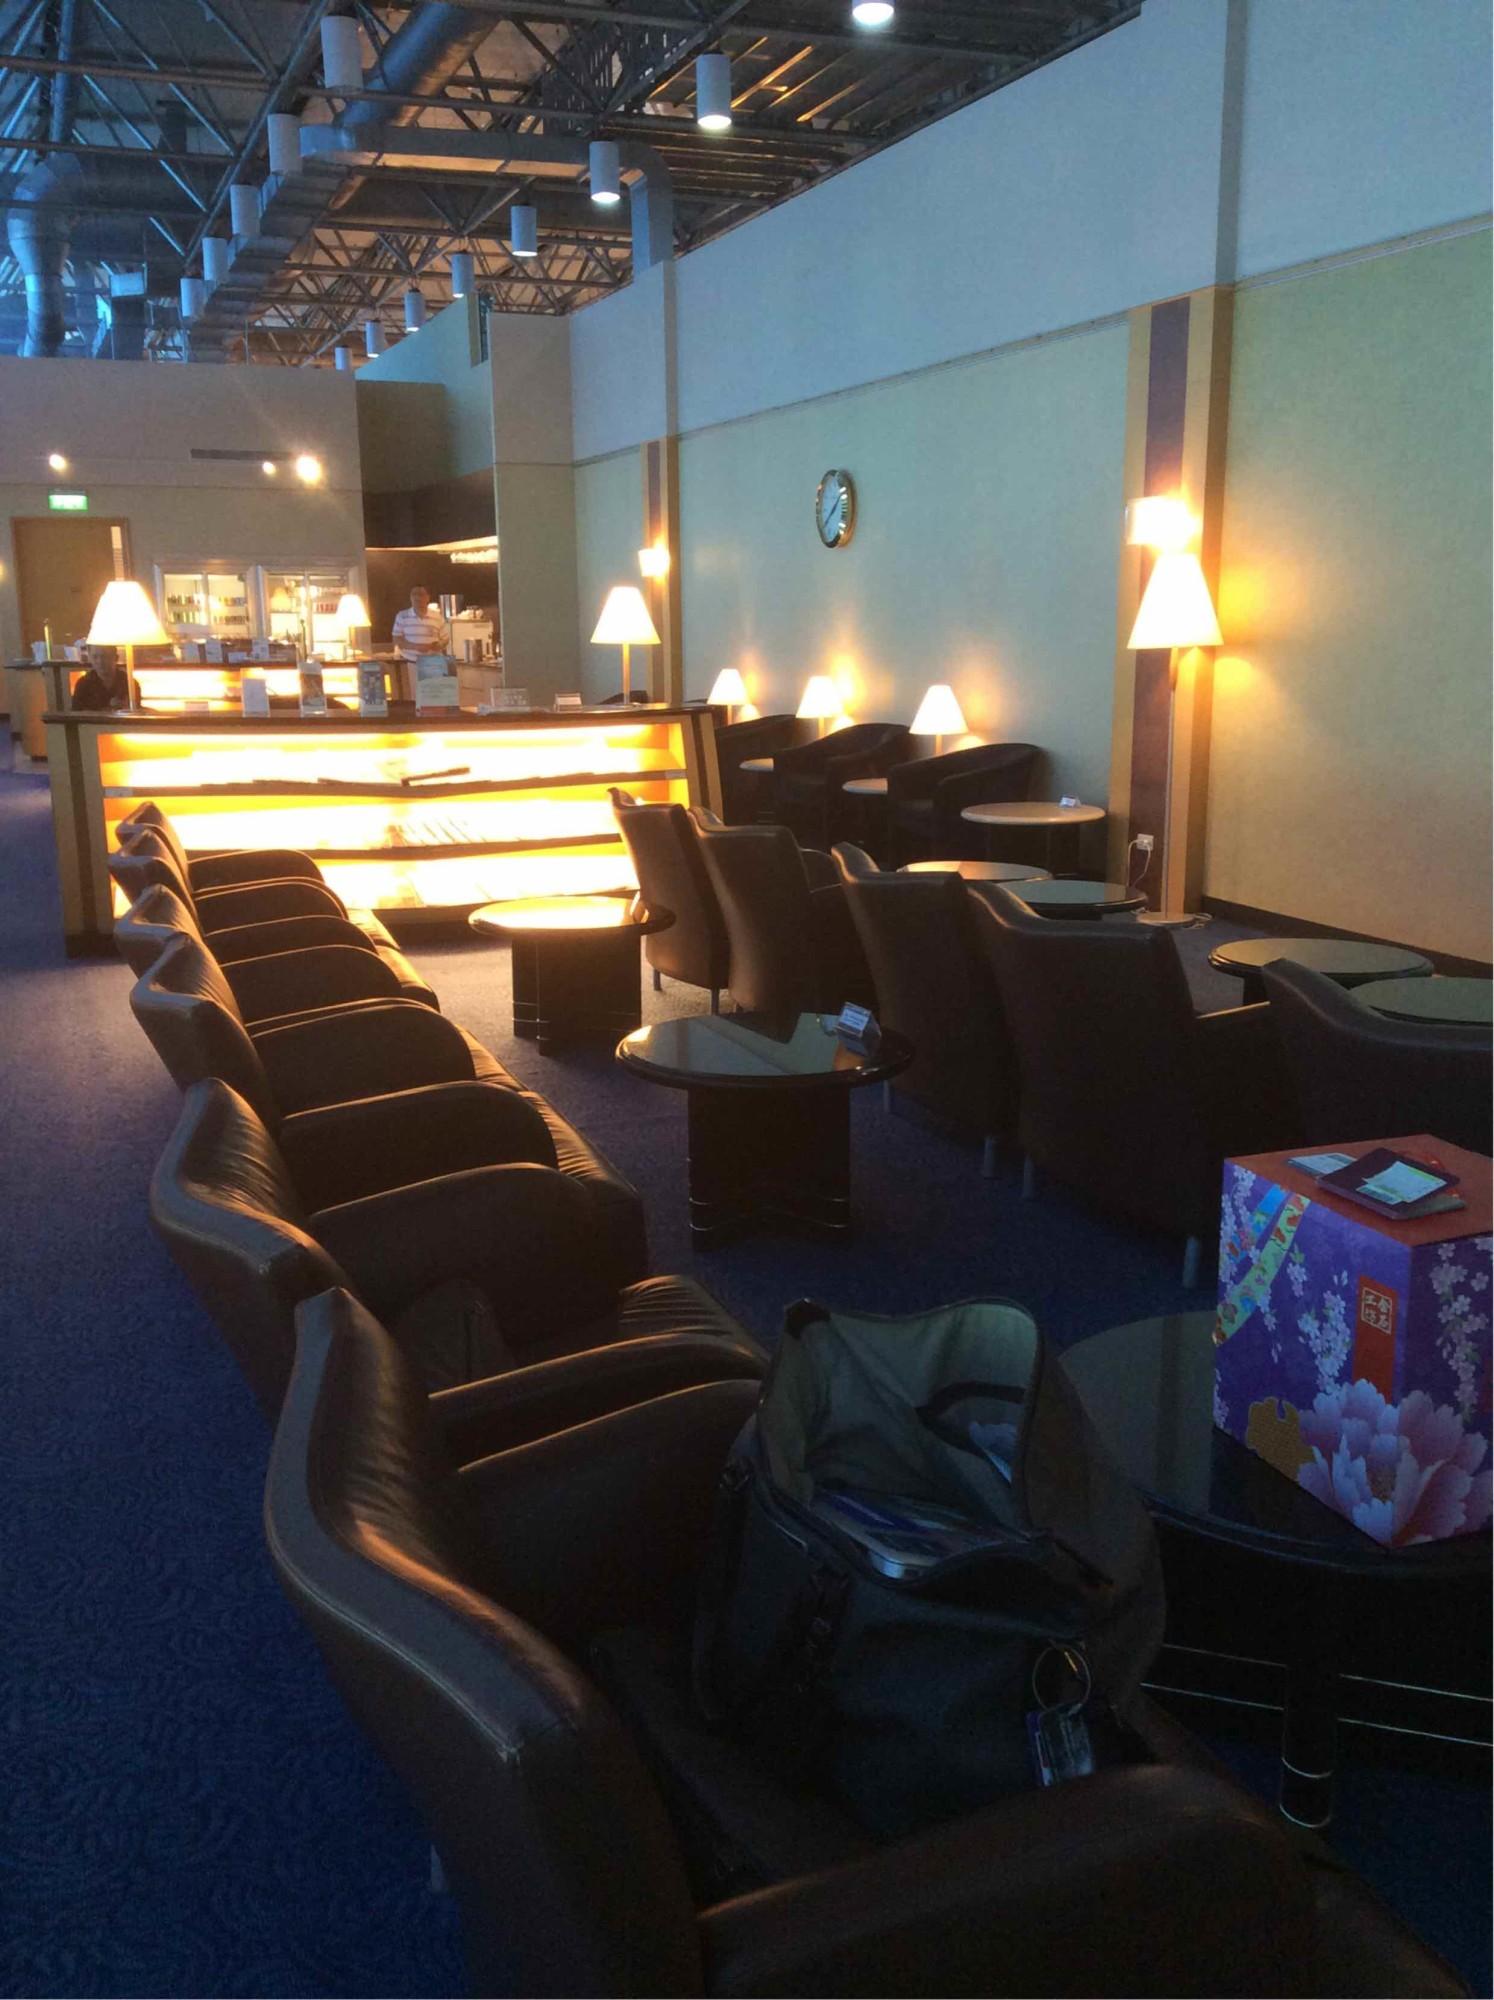 Singapore Airlines SilverKris Business Class Lounge image 1 of 14